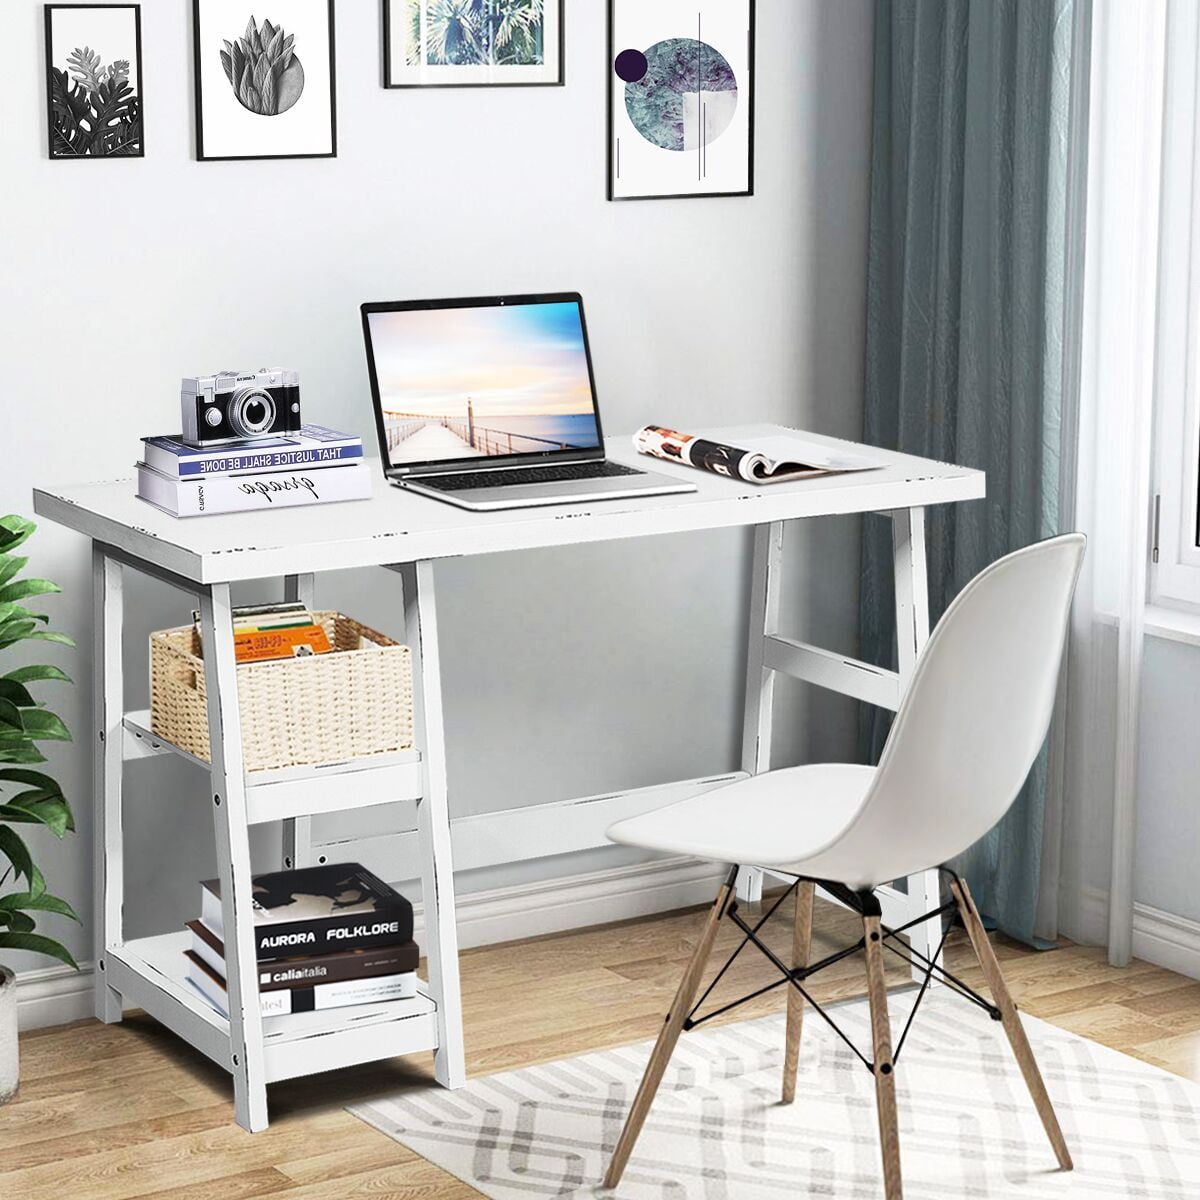 DIY Best Desks For Home Office Canada with Wall Mounted Monitor